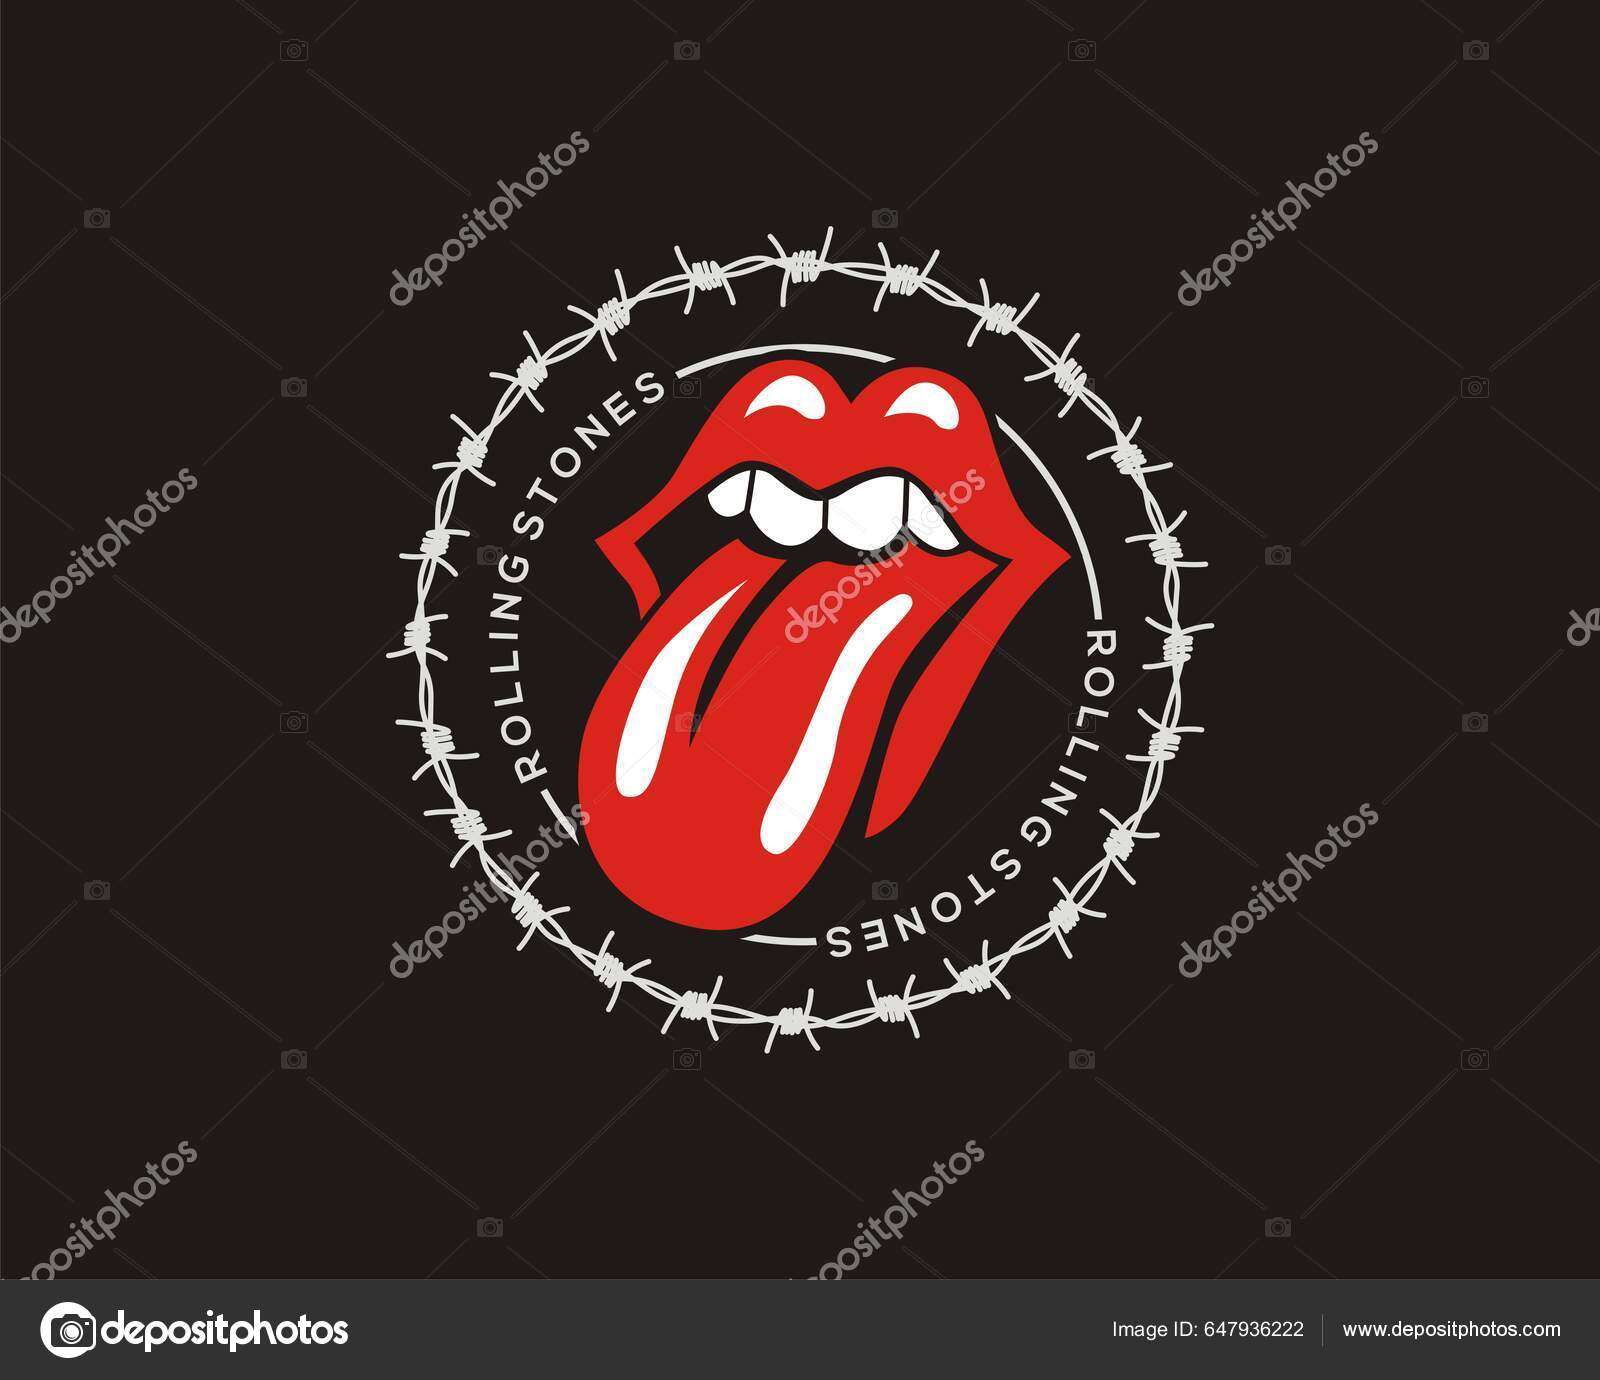 Rolling stones Stock Photos, Royalty Free Rolling stones Images |  Depositphotos